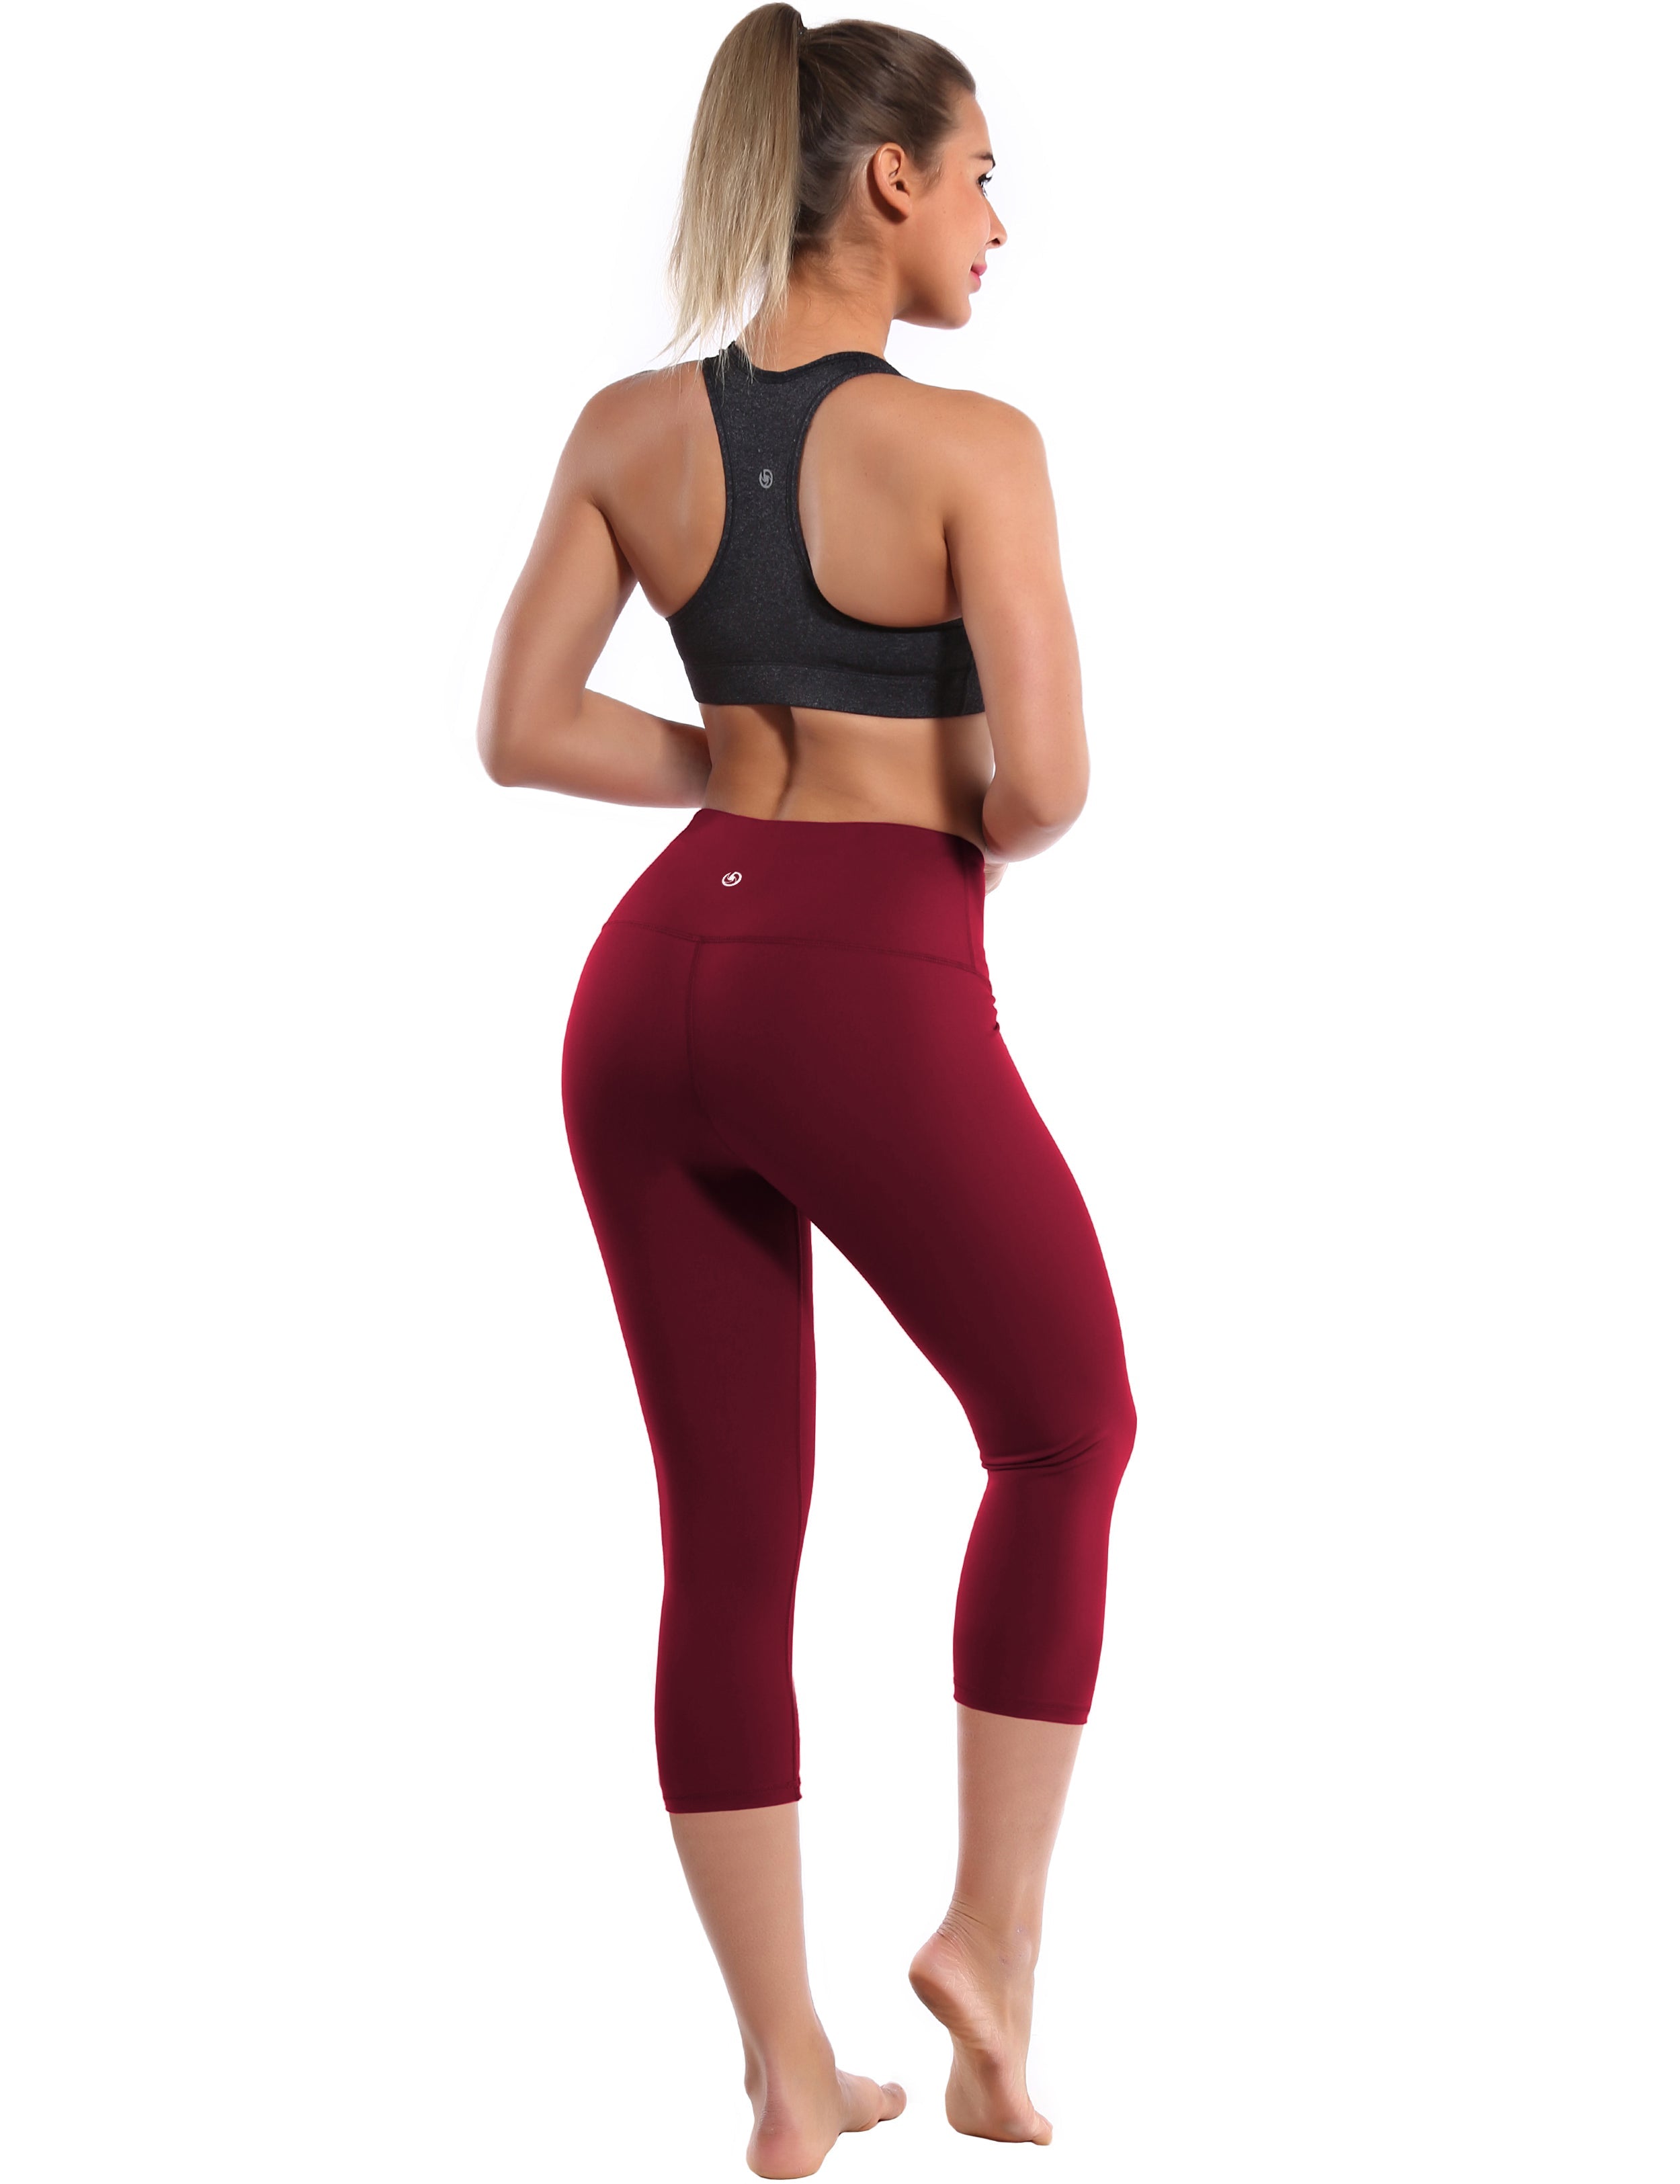 19" High Waist Crop Tight Capris cherryred 75%Nylon/25%Spandex Fabric doesn't attract lint easily 4-way stretch No see-through Moisture-wicking Tummy control Inner pocket